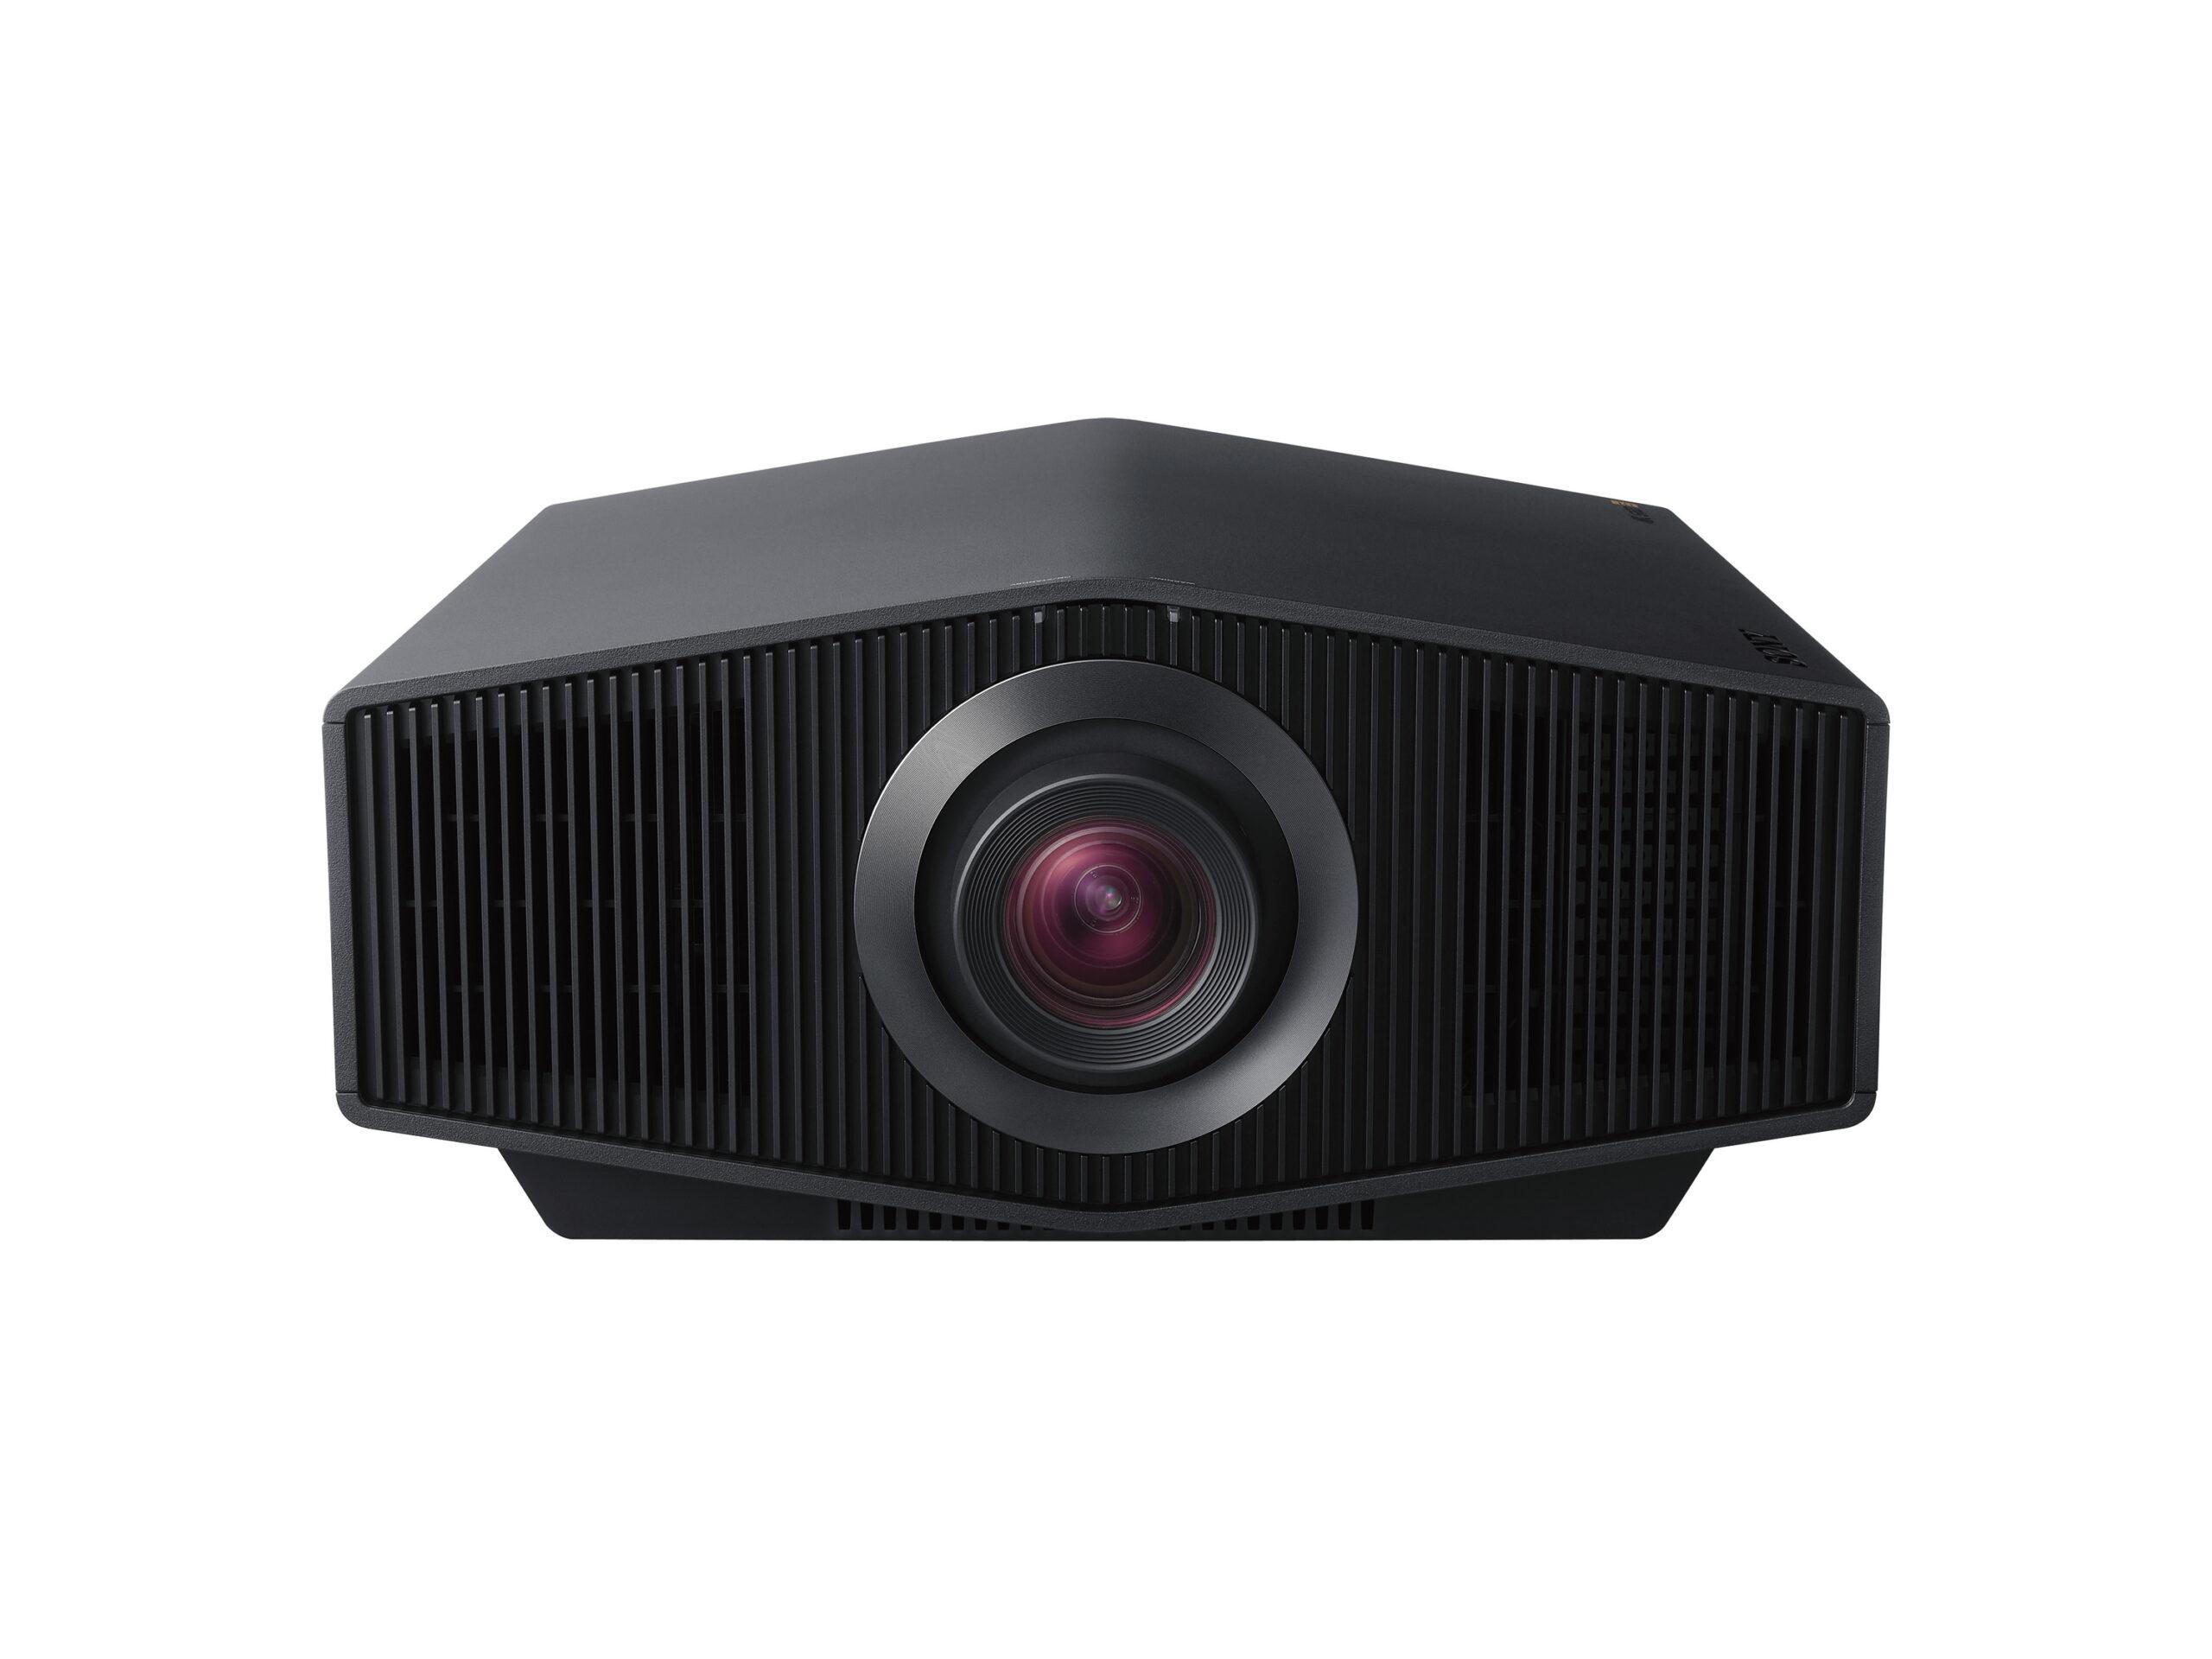 This is no mere annual refresh. Sony's three new home theater projectors are a generational leap forward. bb2e0d32 vplxw7000 front 220201 02 large scaled